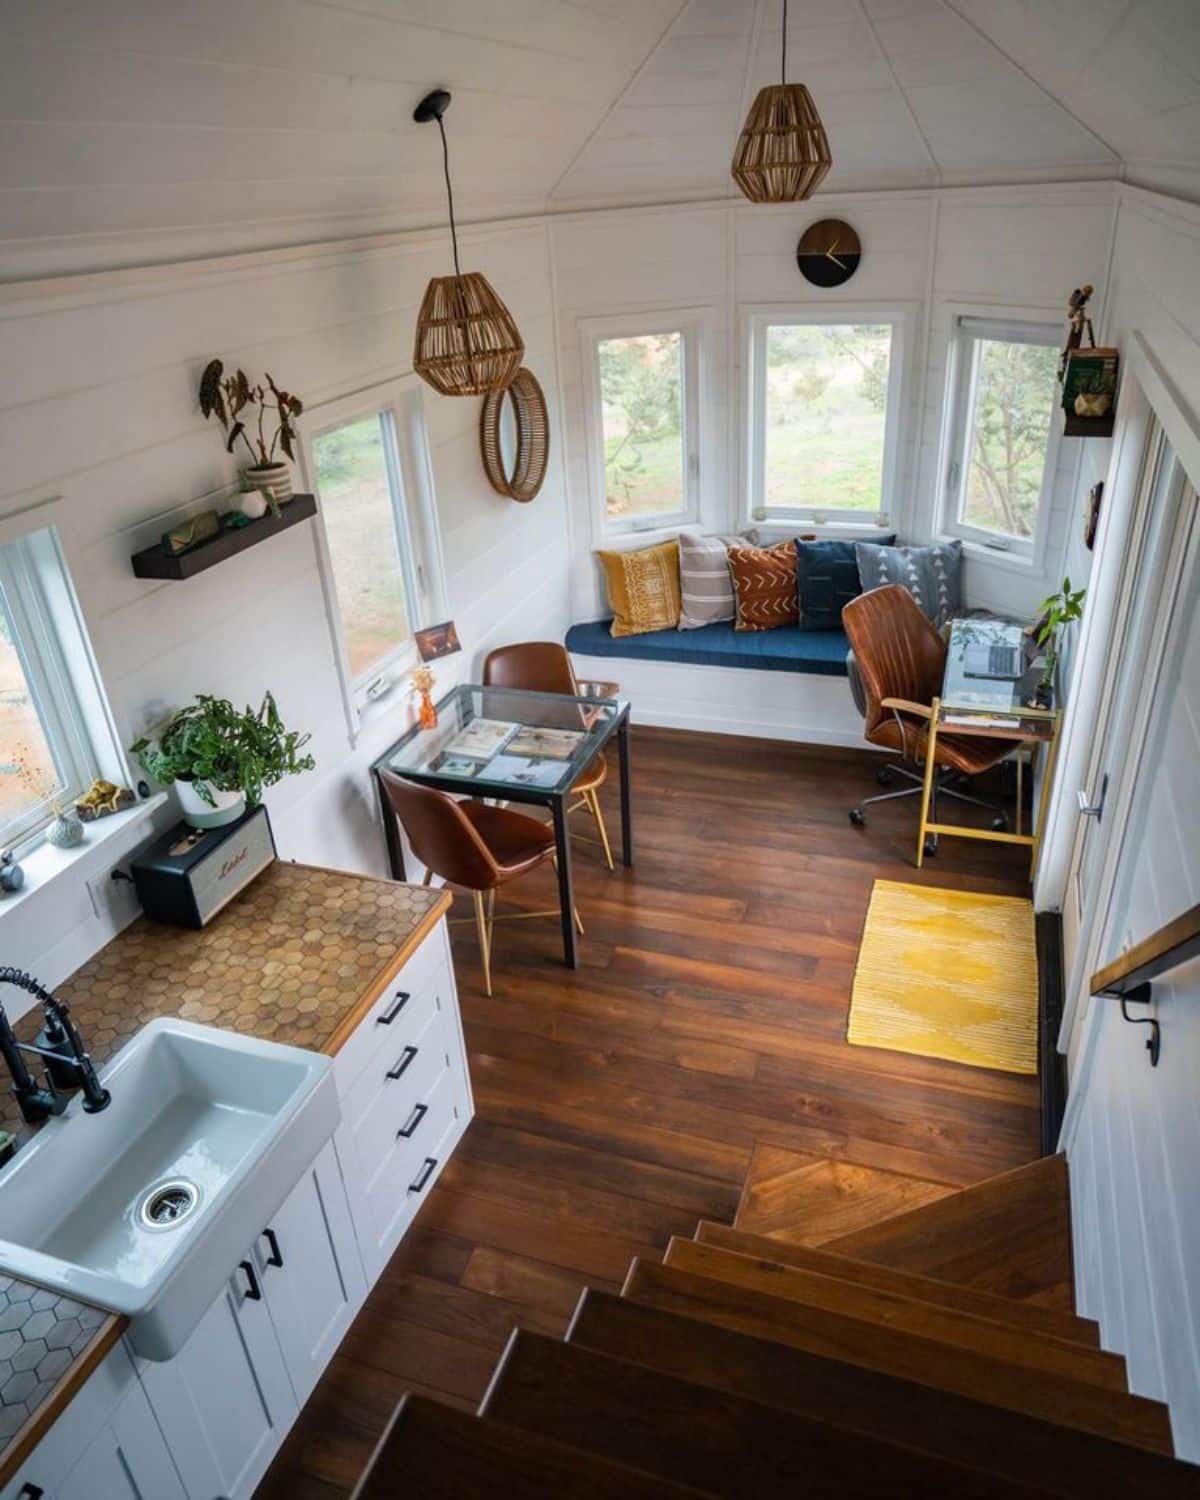 Super cool interiors of High End Tiny House